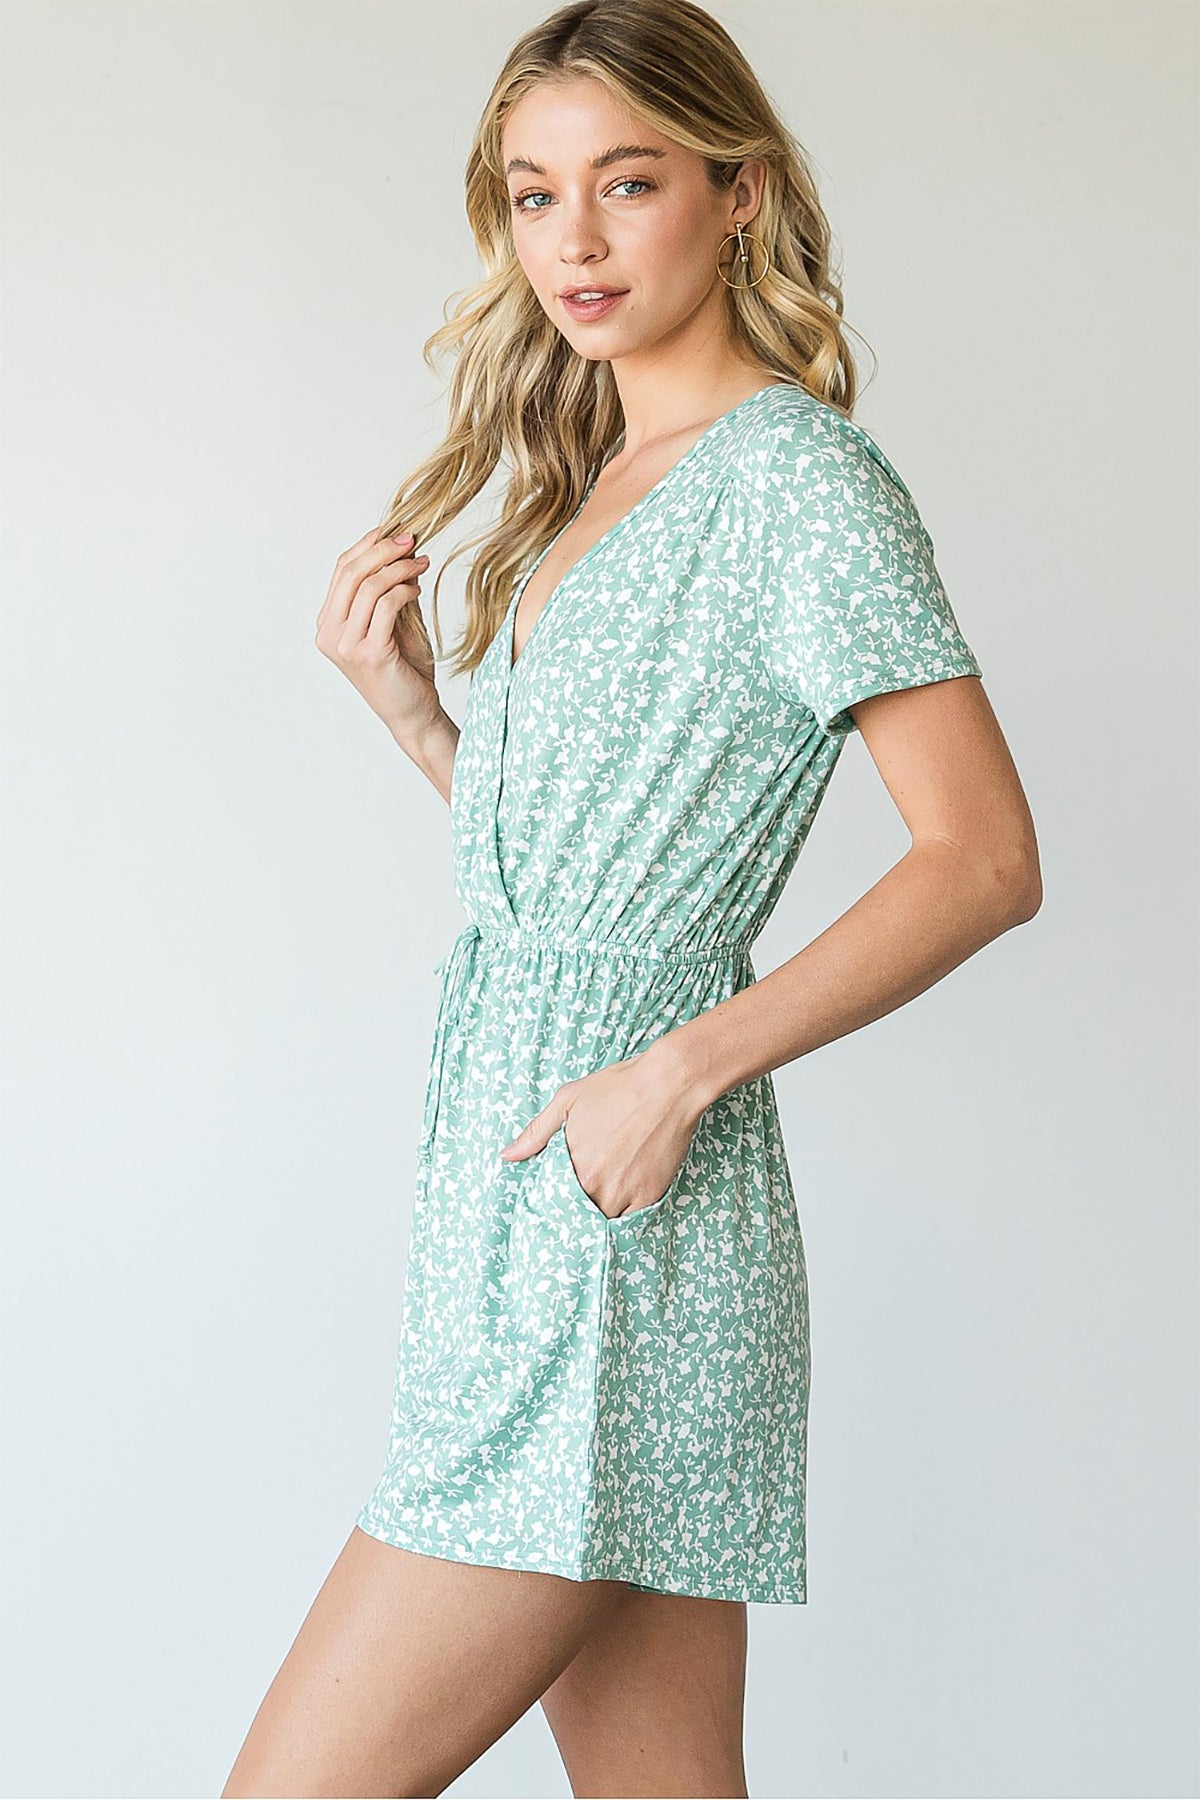 R5340X-SAGE PLUS SIZE FLORAL SHORT SLEEVE ROMPER 2-2-2 (NOW $5.75 ONLY!)